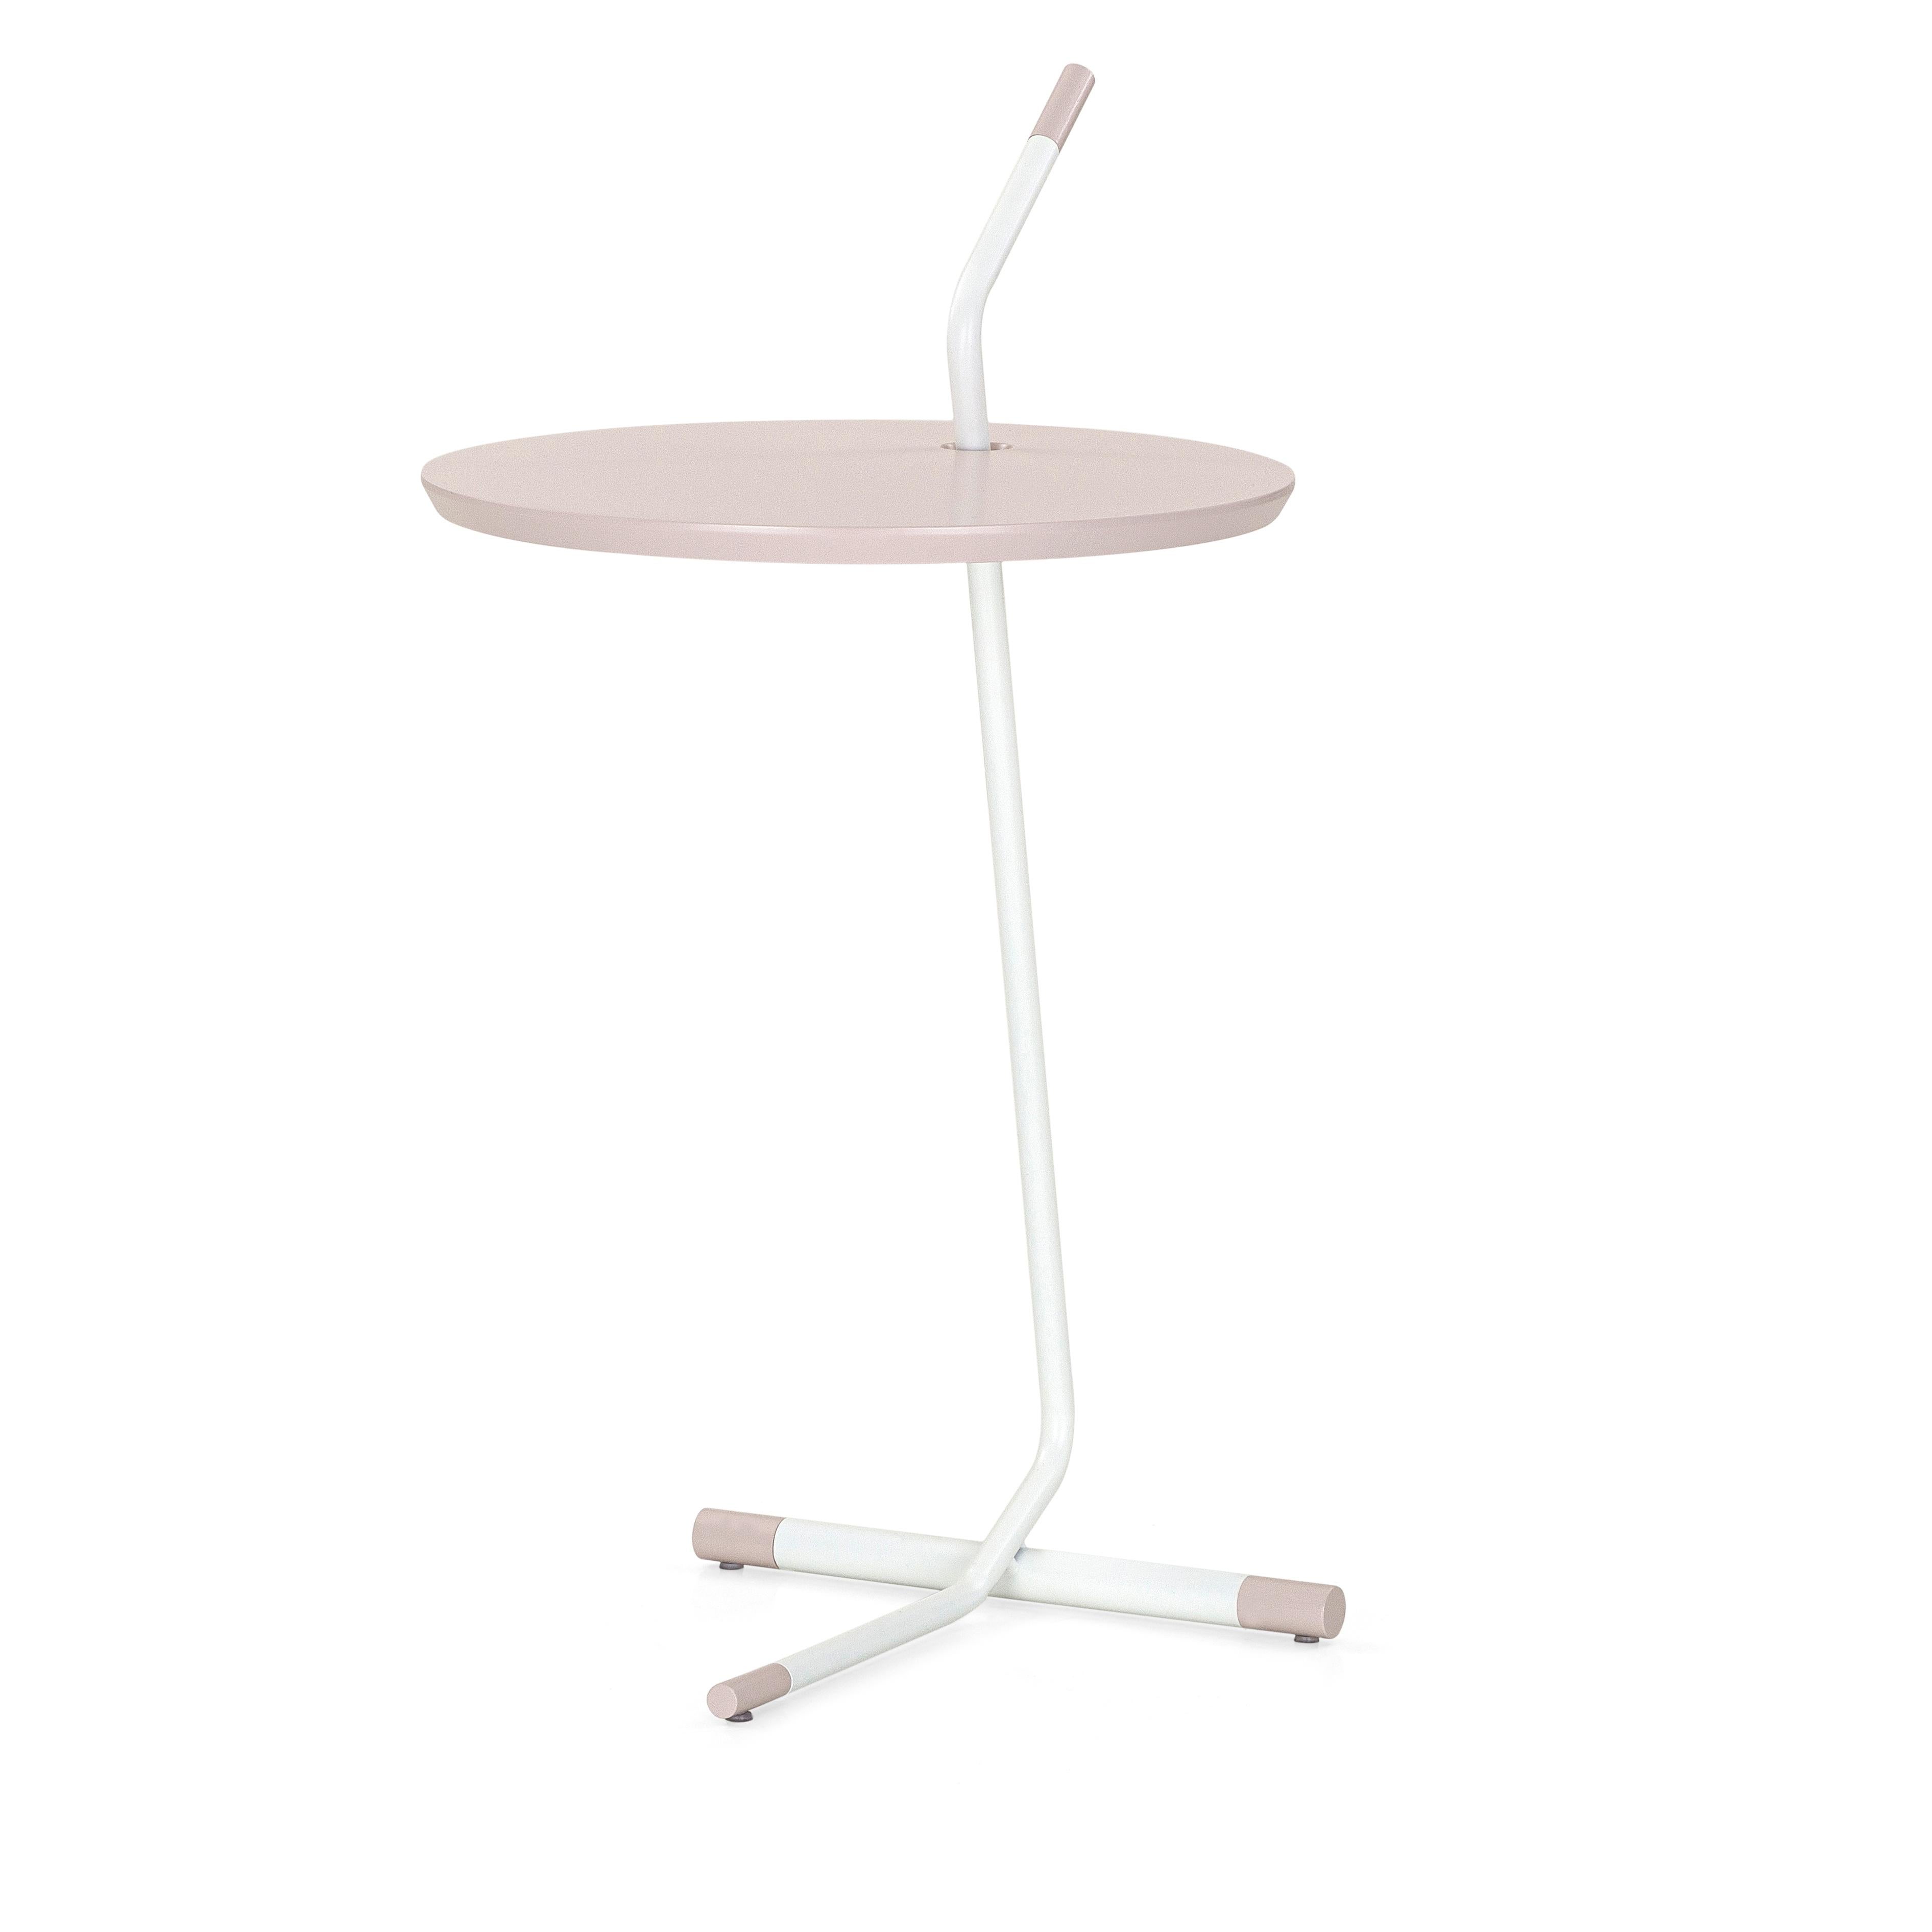 The like side table features an MDF wood top in quartz finish and a metal base. This table is made of parallels, giving a distinctive shape and an unconventional look. This table features a light pink wood finish and the metal will attract all the